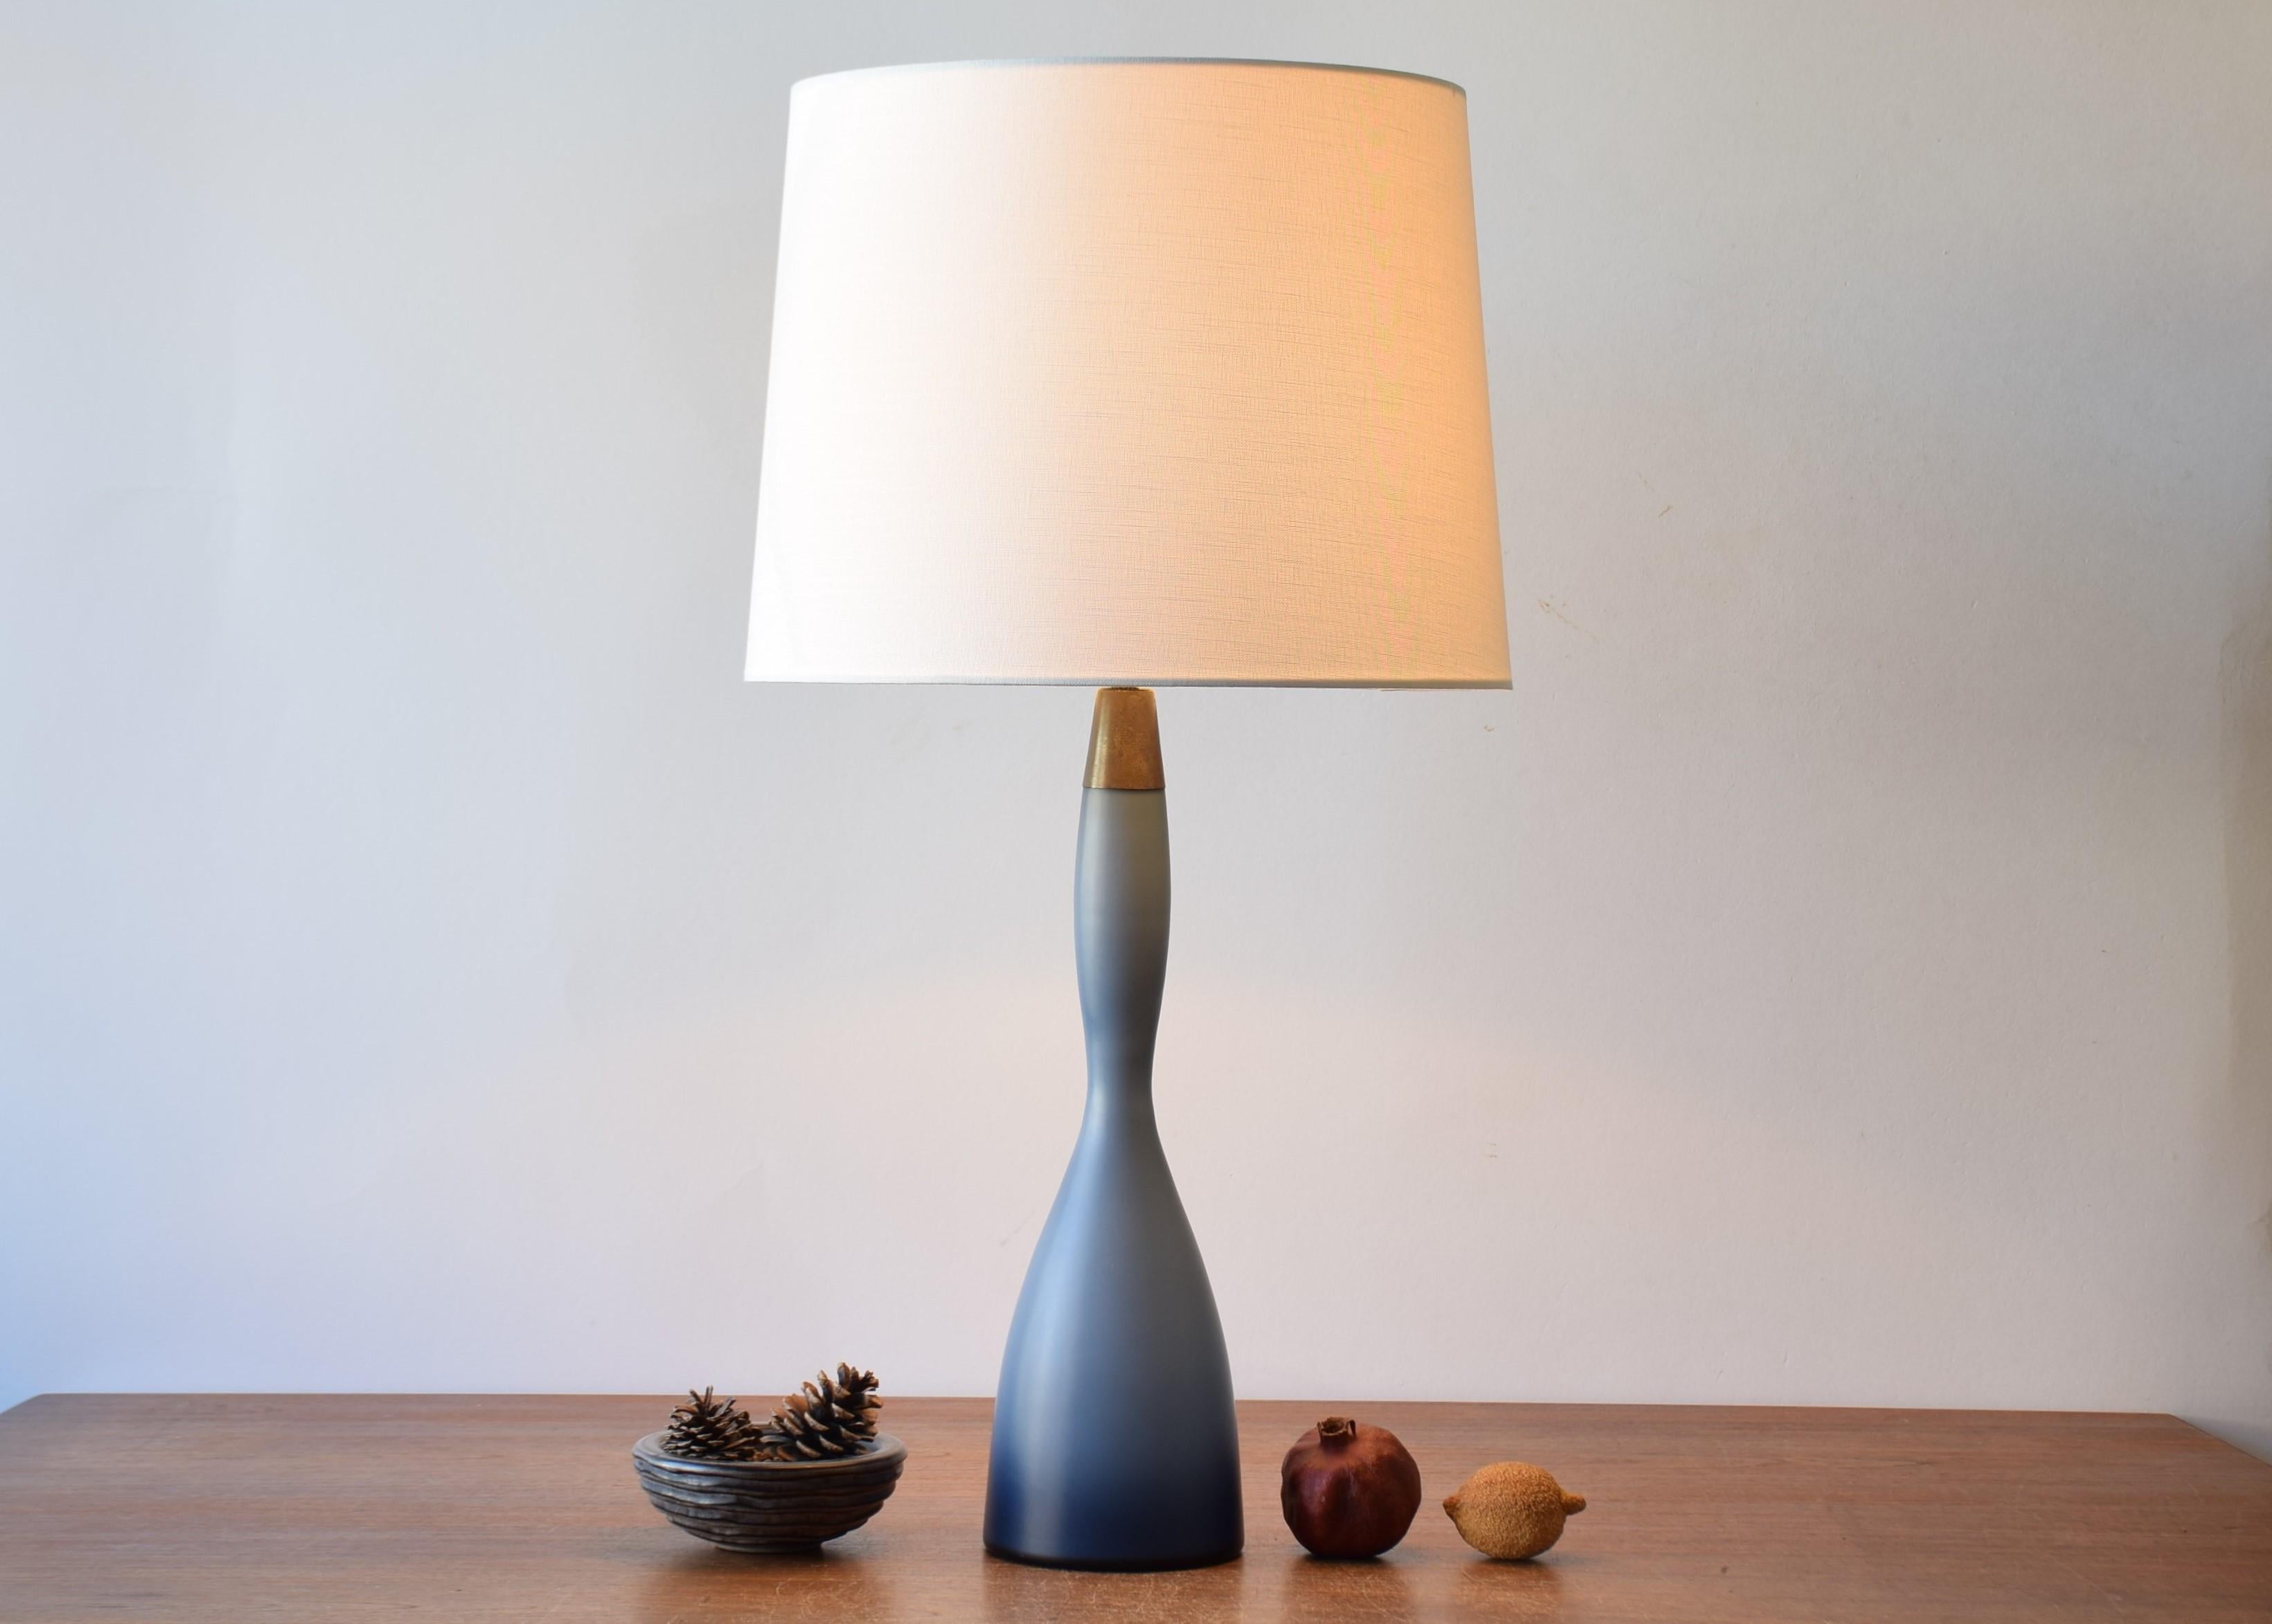 Tall, slim and elegant table lamp from Danish Kastrup Glasværk (later Holmegaard Glass).
It is made of a dreamy dusty blue frosted glass called 